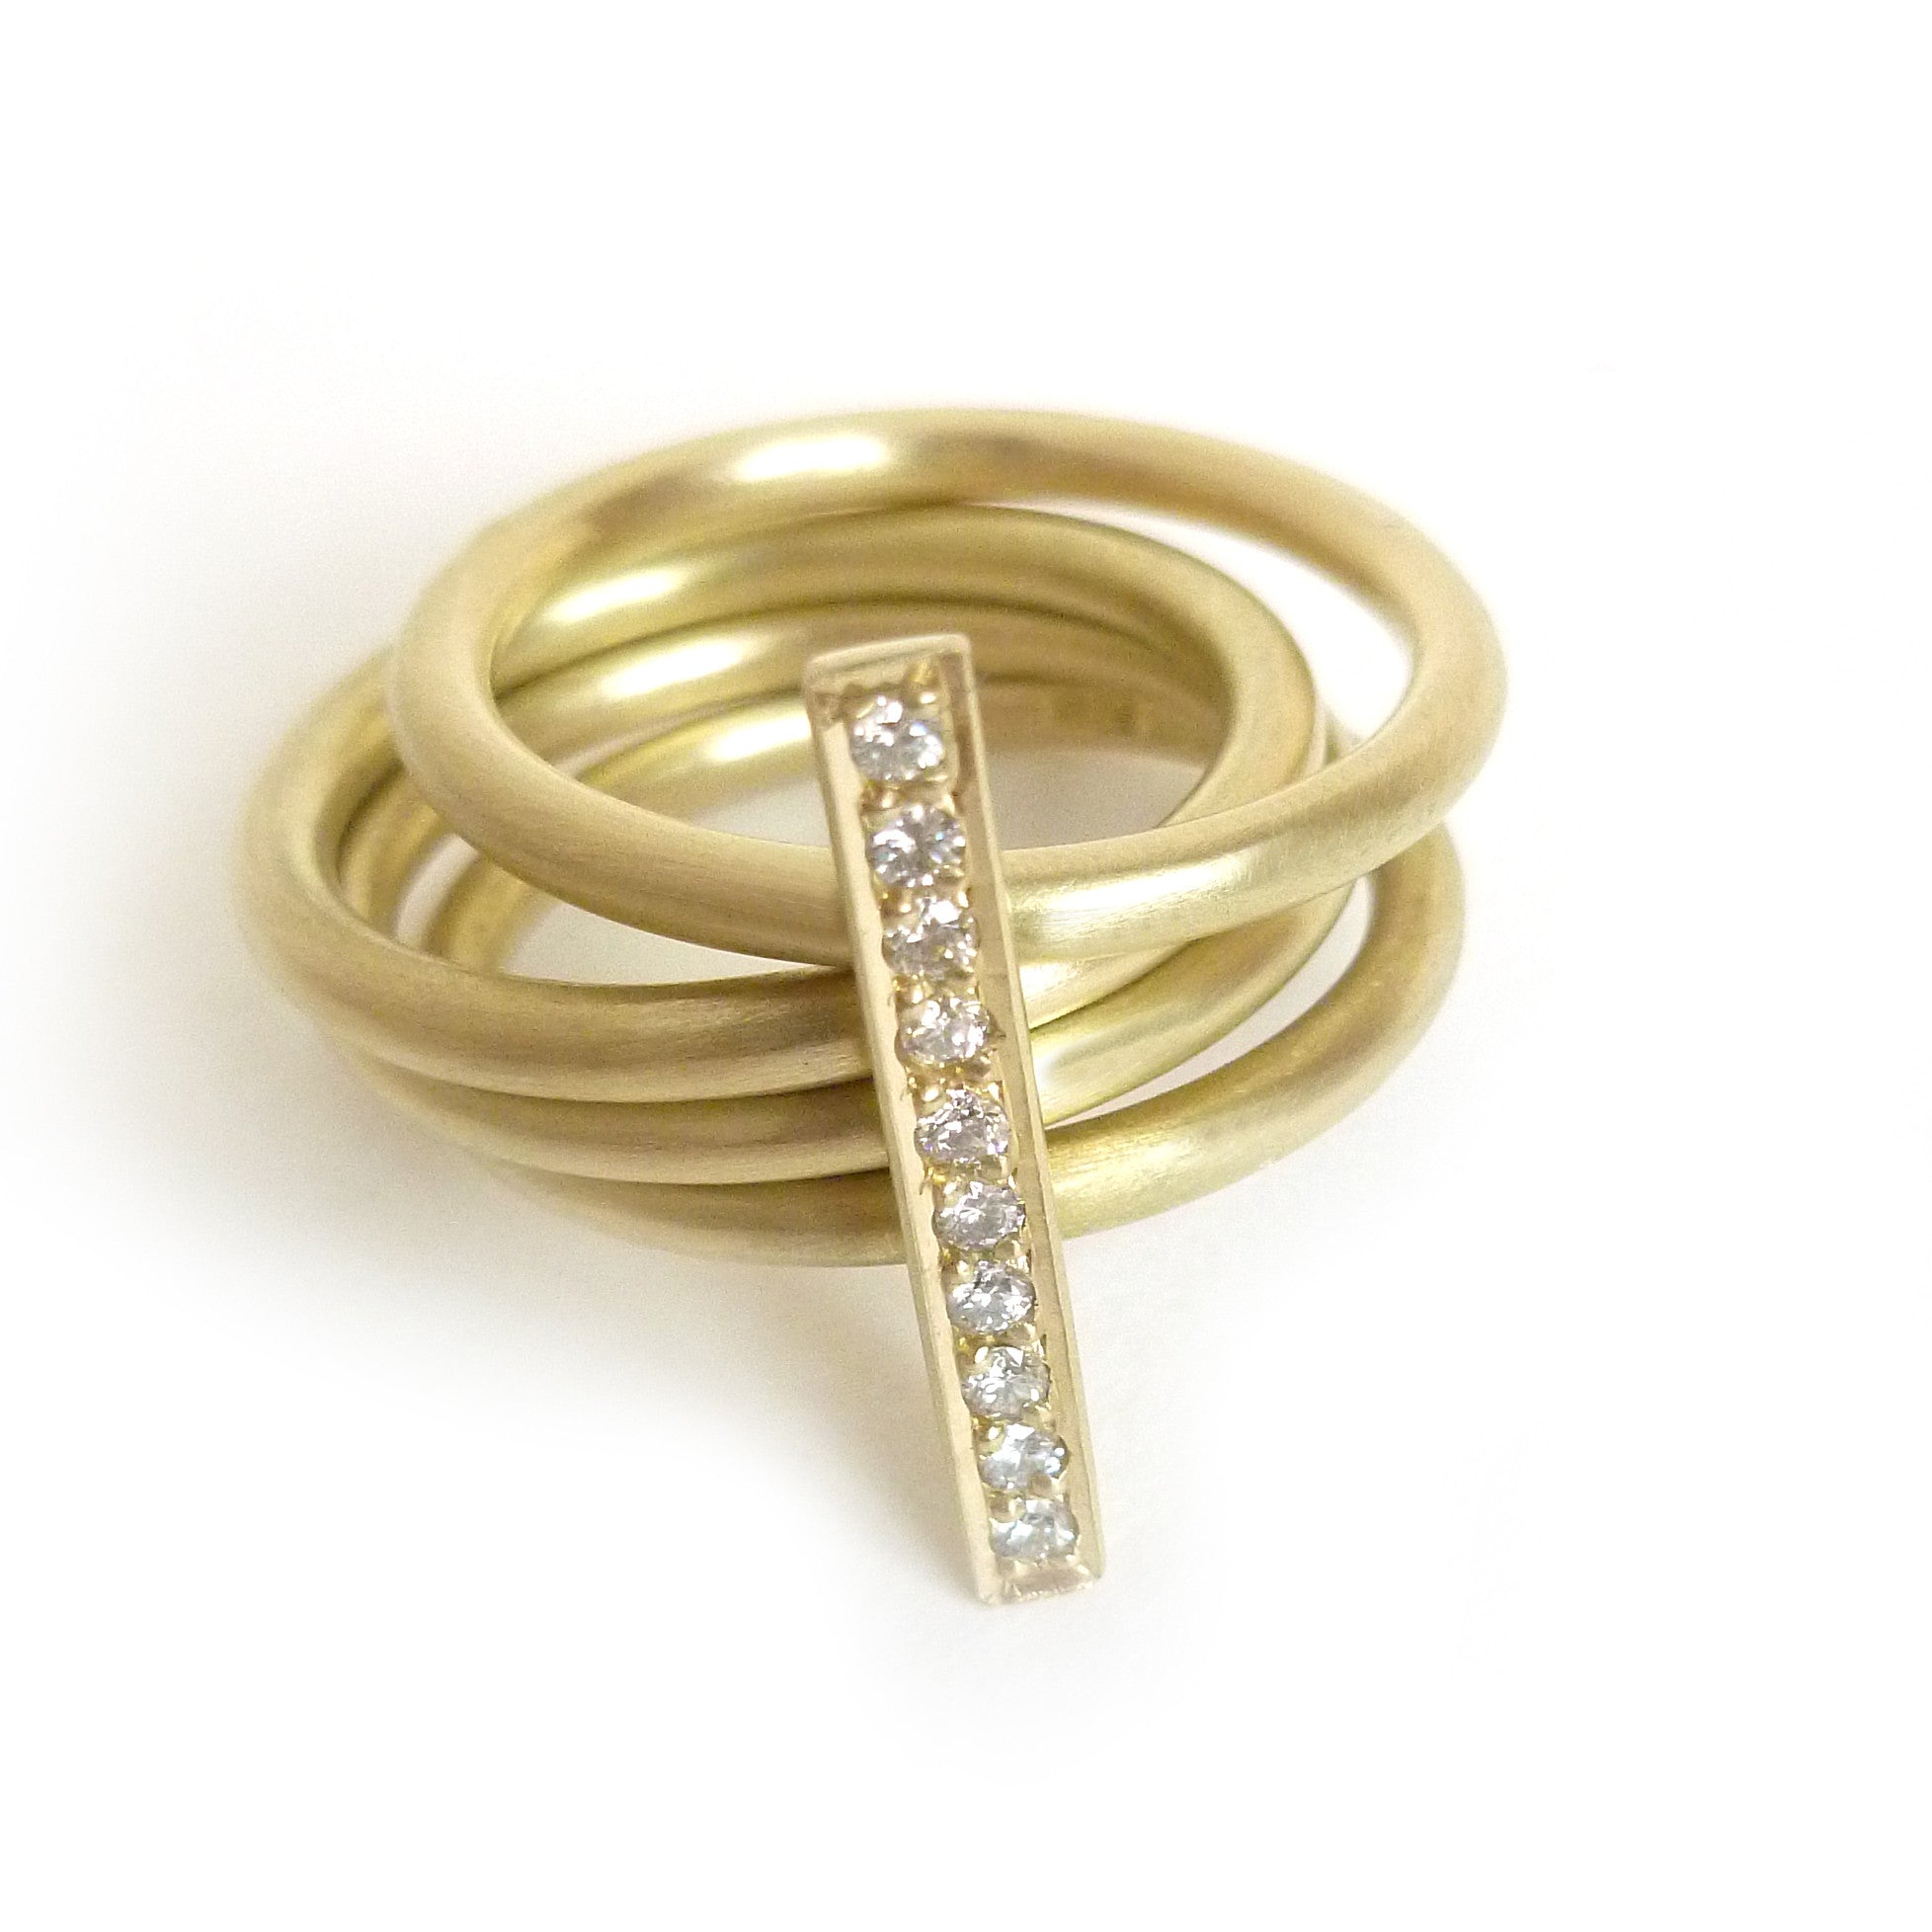 A contemporary heavy weight modern four band stacking gold ring with a row of pave diamonds. Multi band ring or interlocking ring.